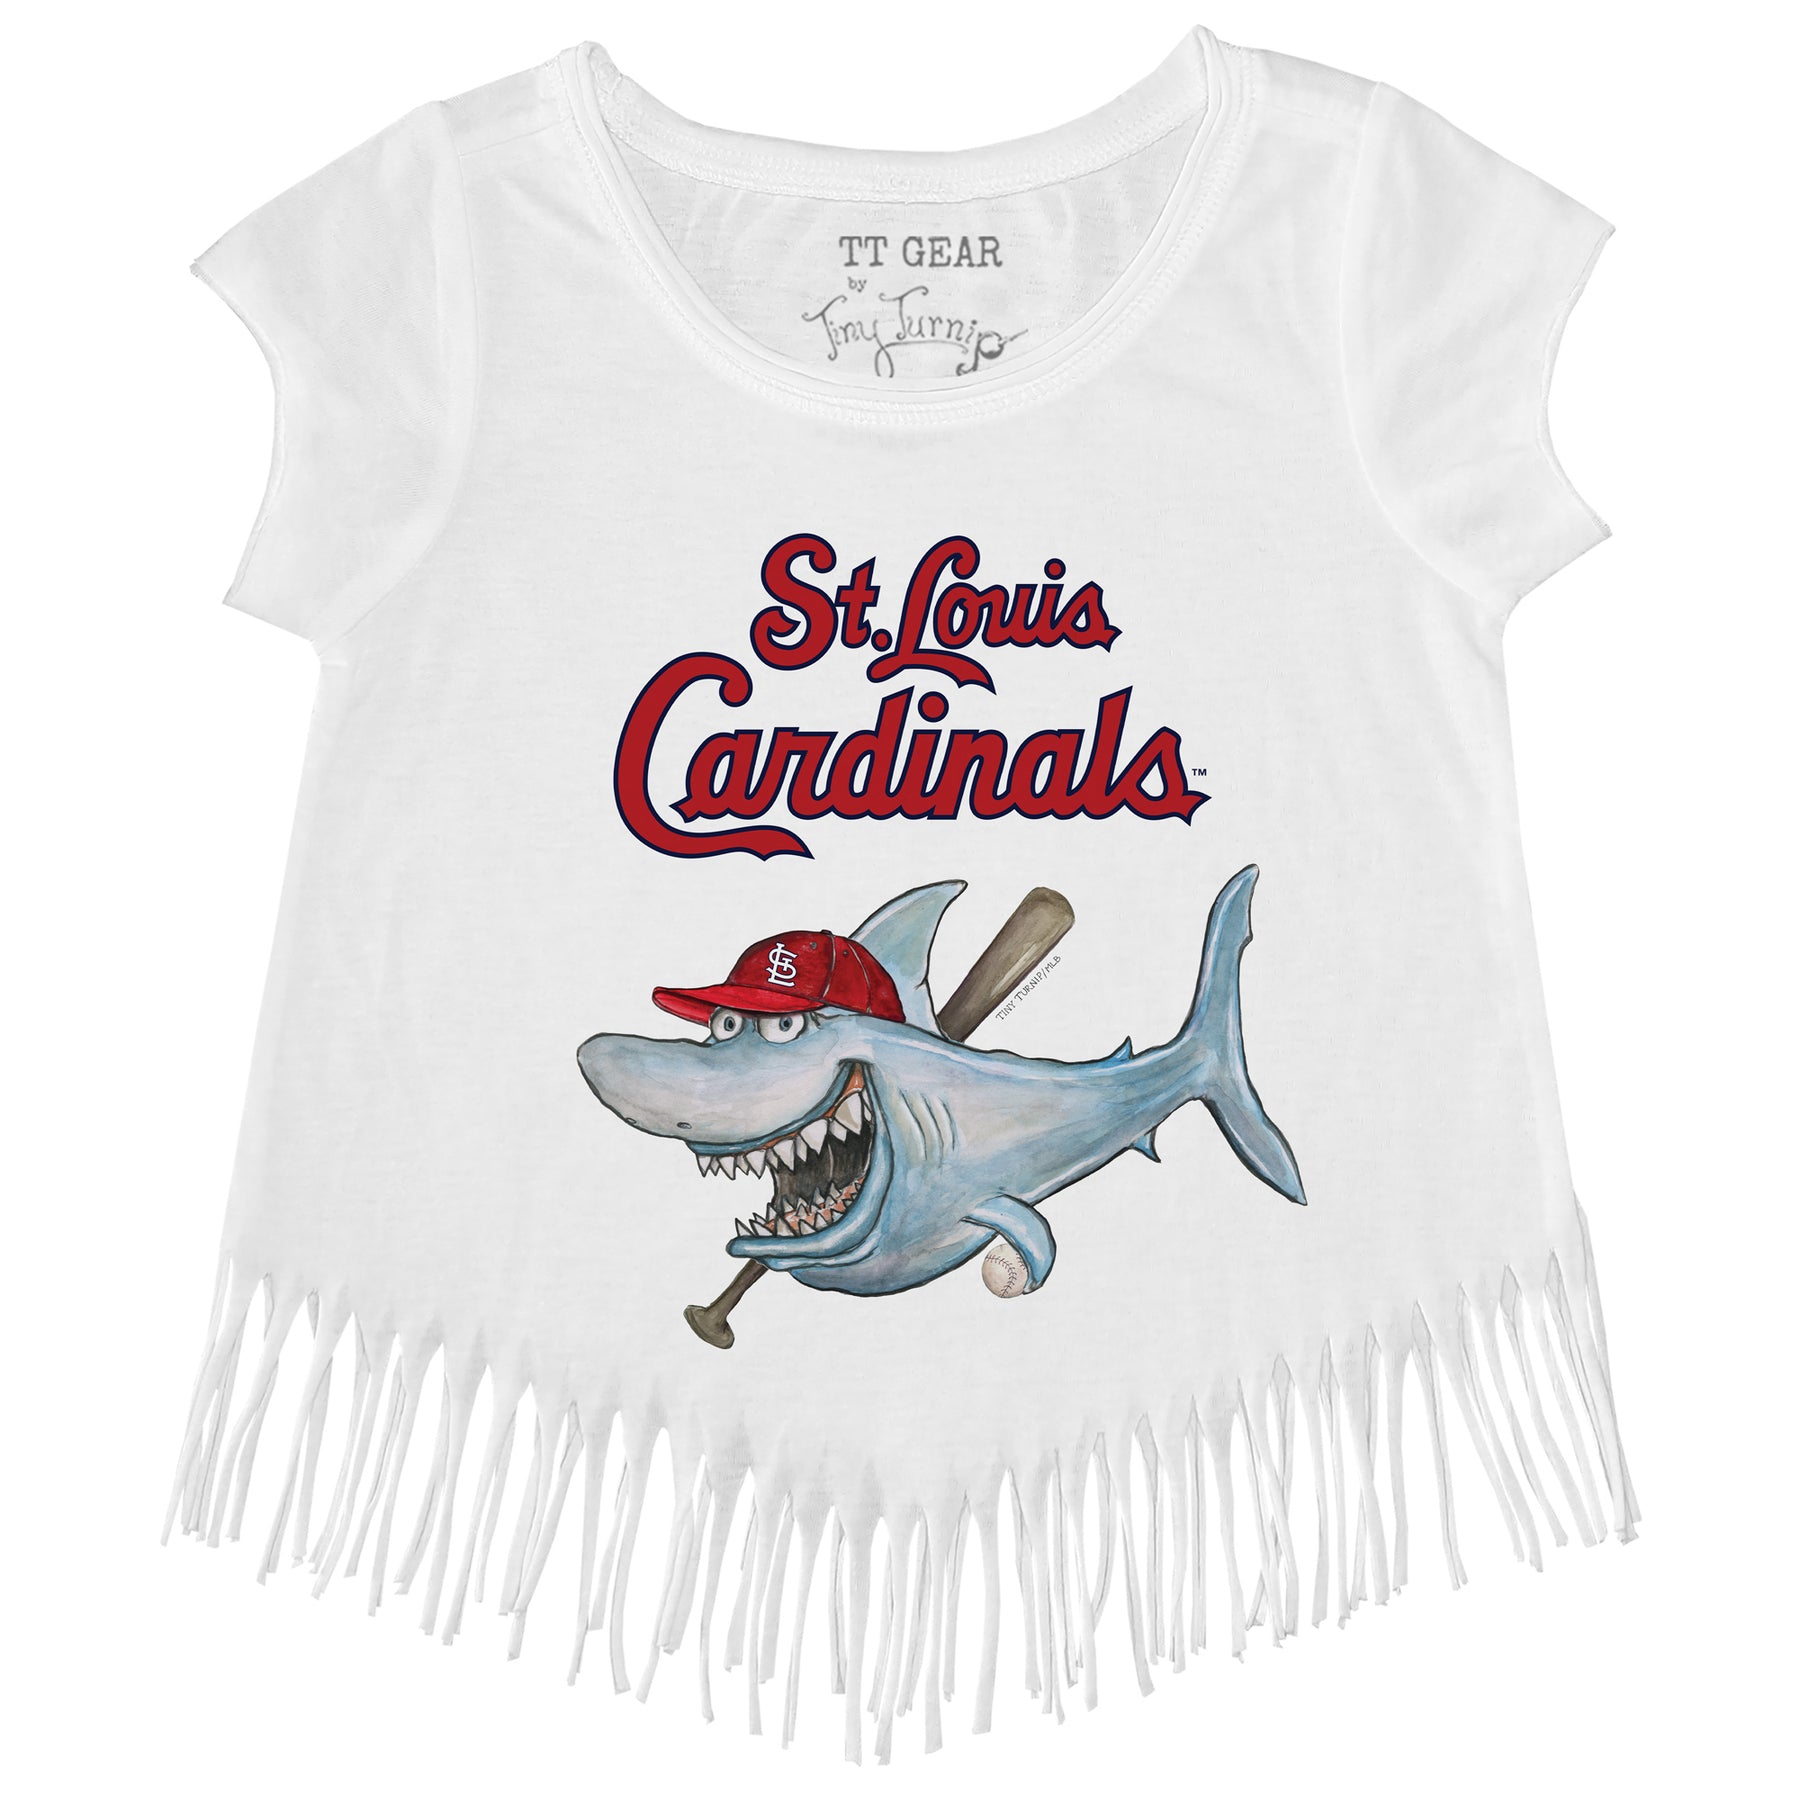 St. Louis Cardinals Tiny Turnip Youth State Outline 3/4-Sleeve Raglan  T-Shirt - White/Red